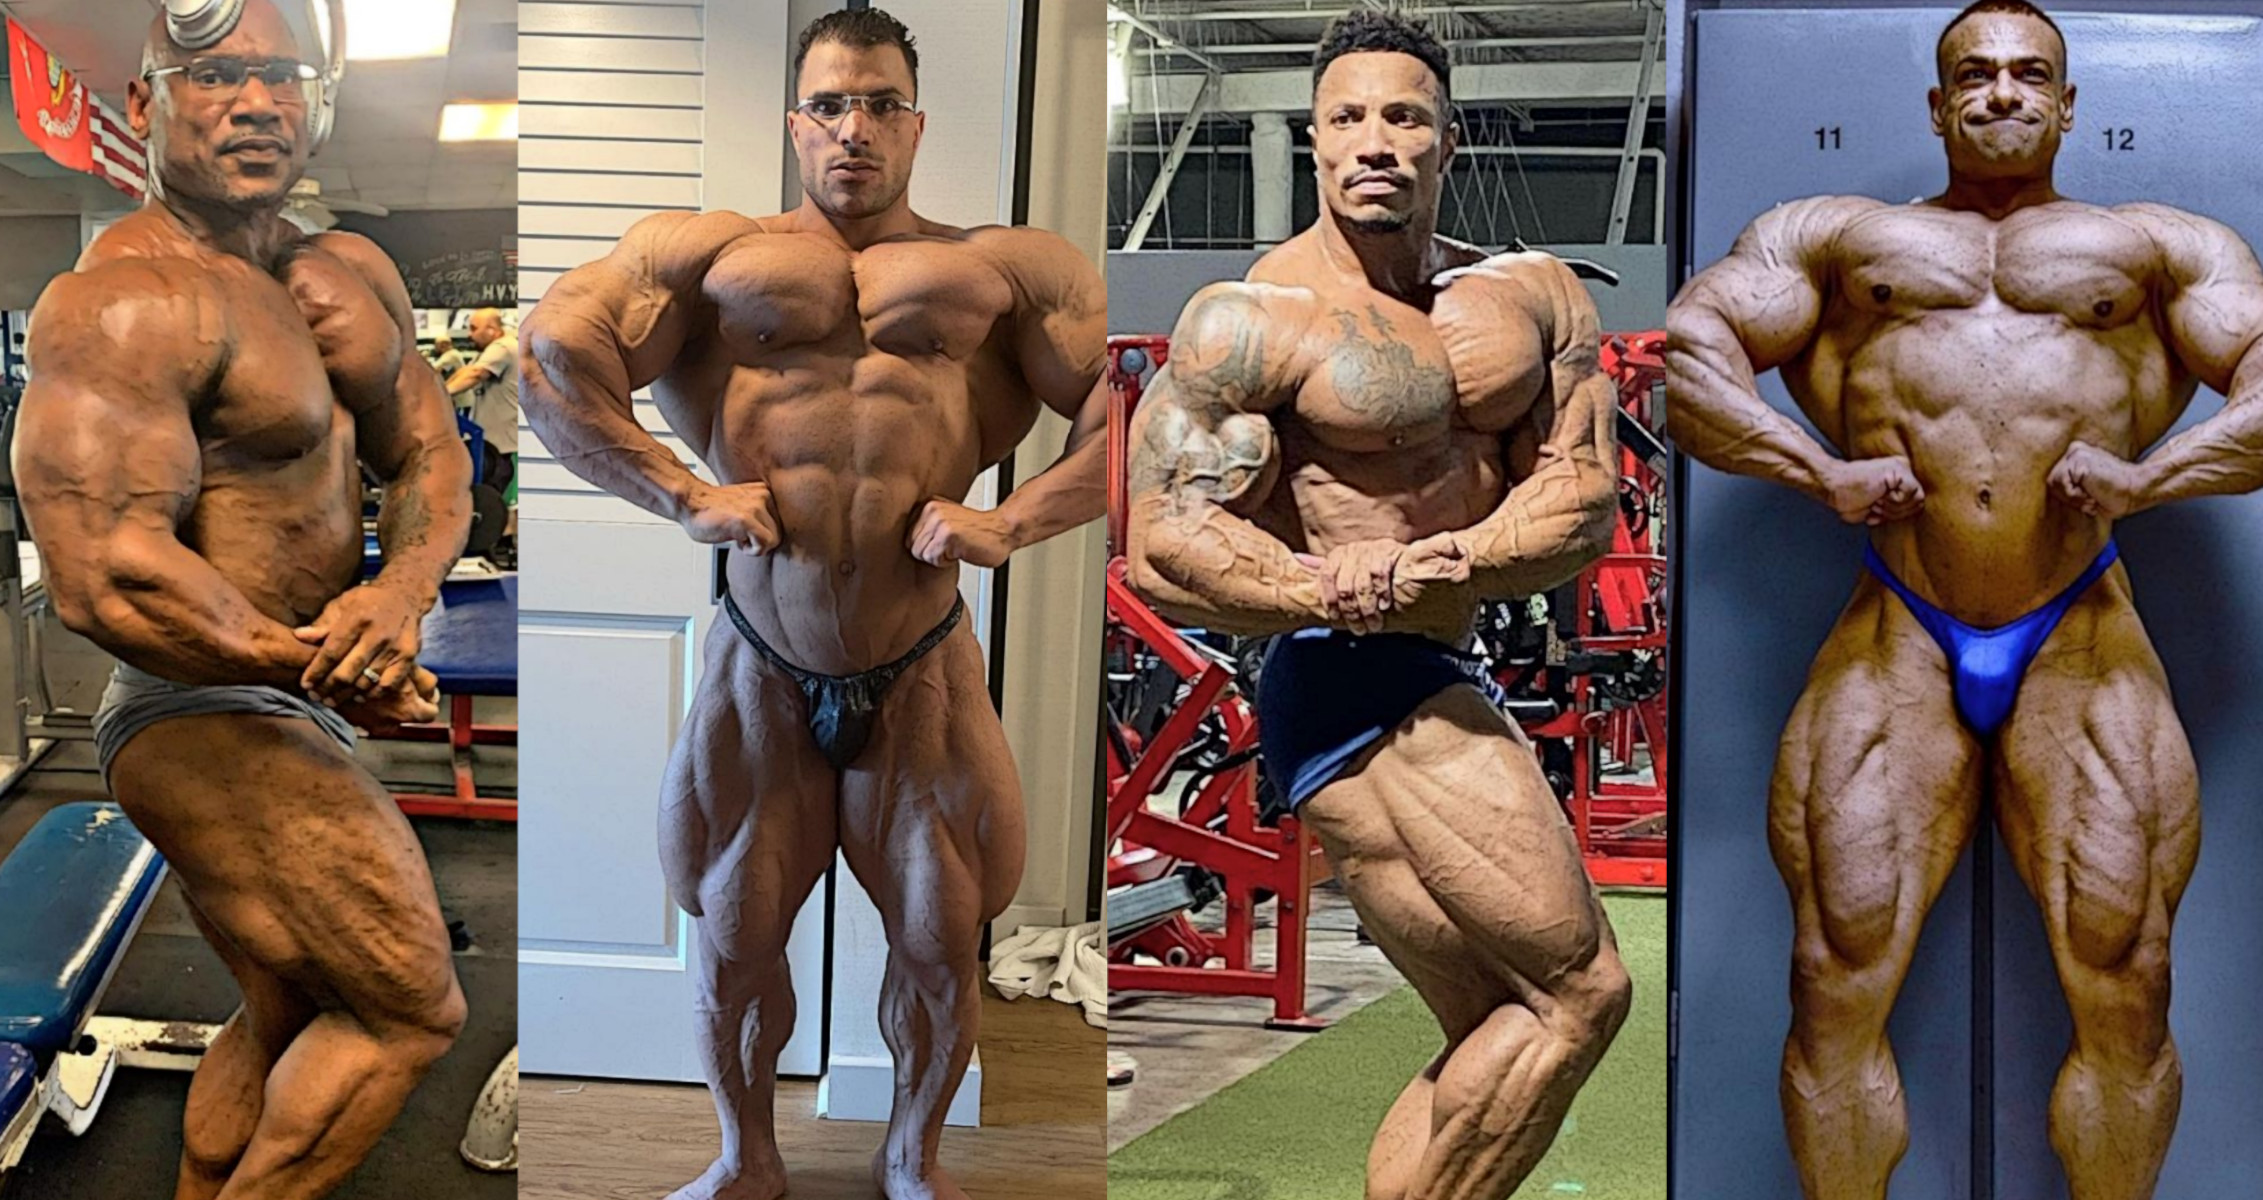 California Pro Preview: Who Will Secure a Spot at the 2021 Olympia?